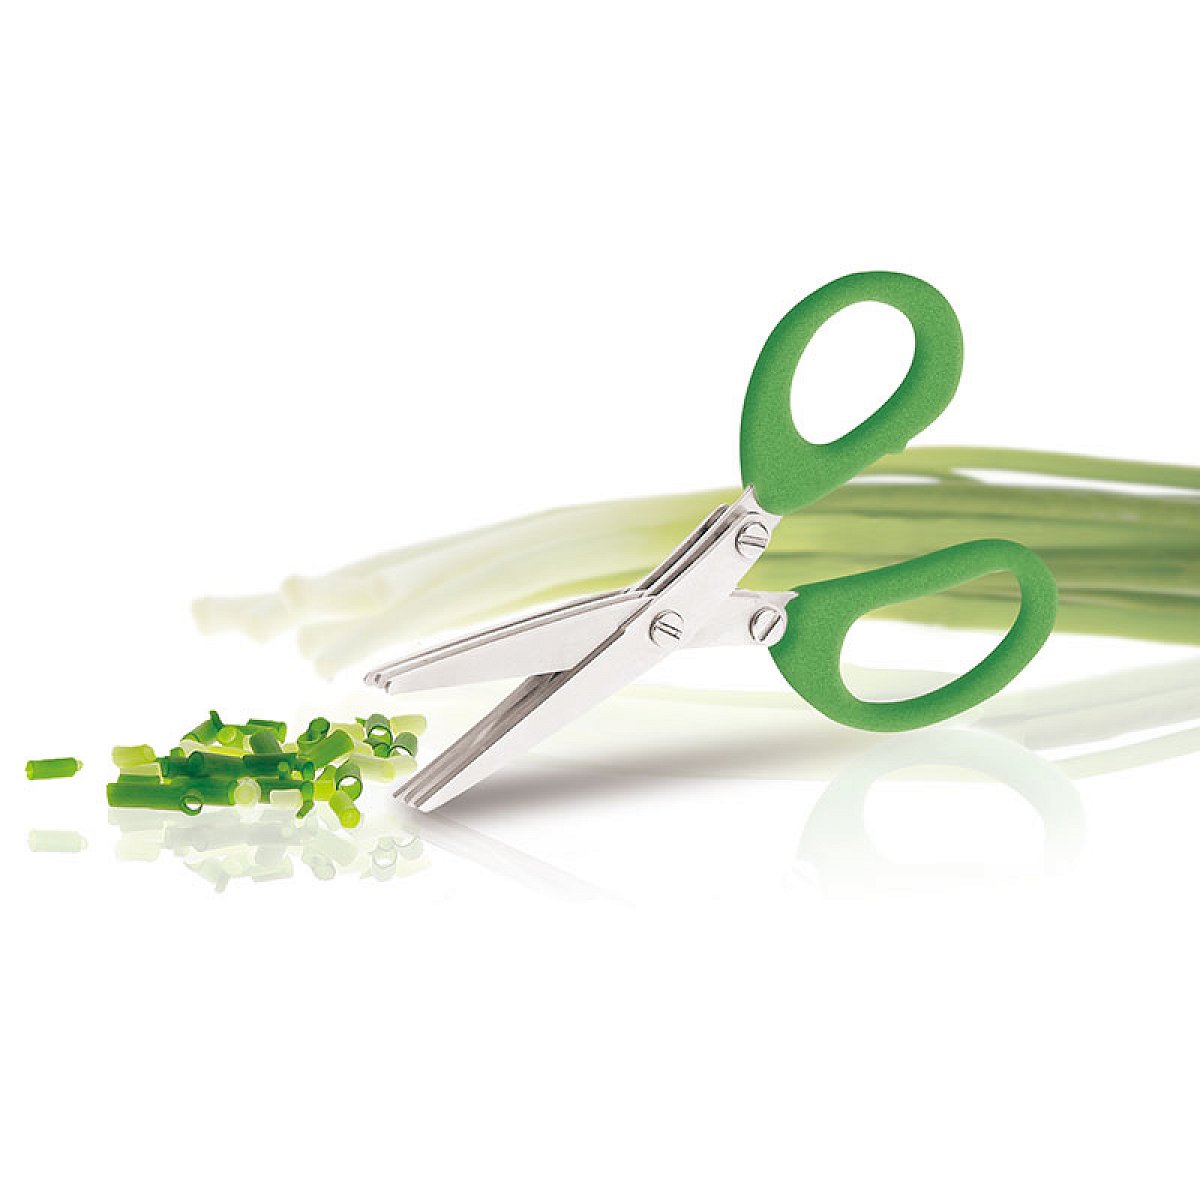 Herb scissors with 6 blades